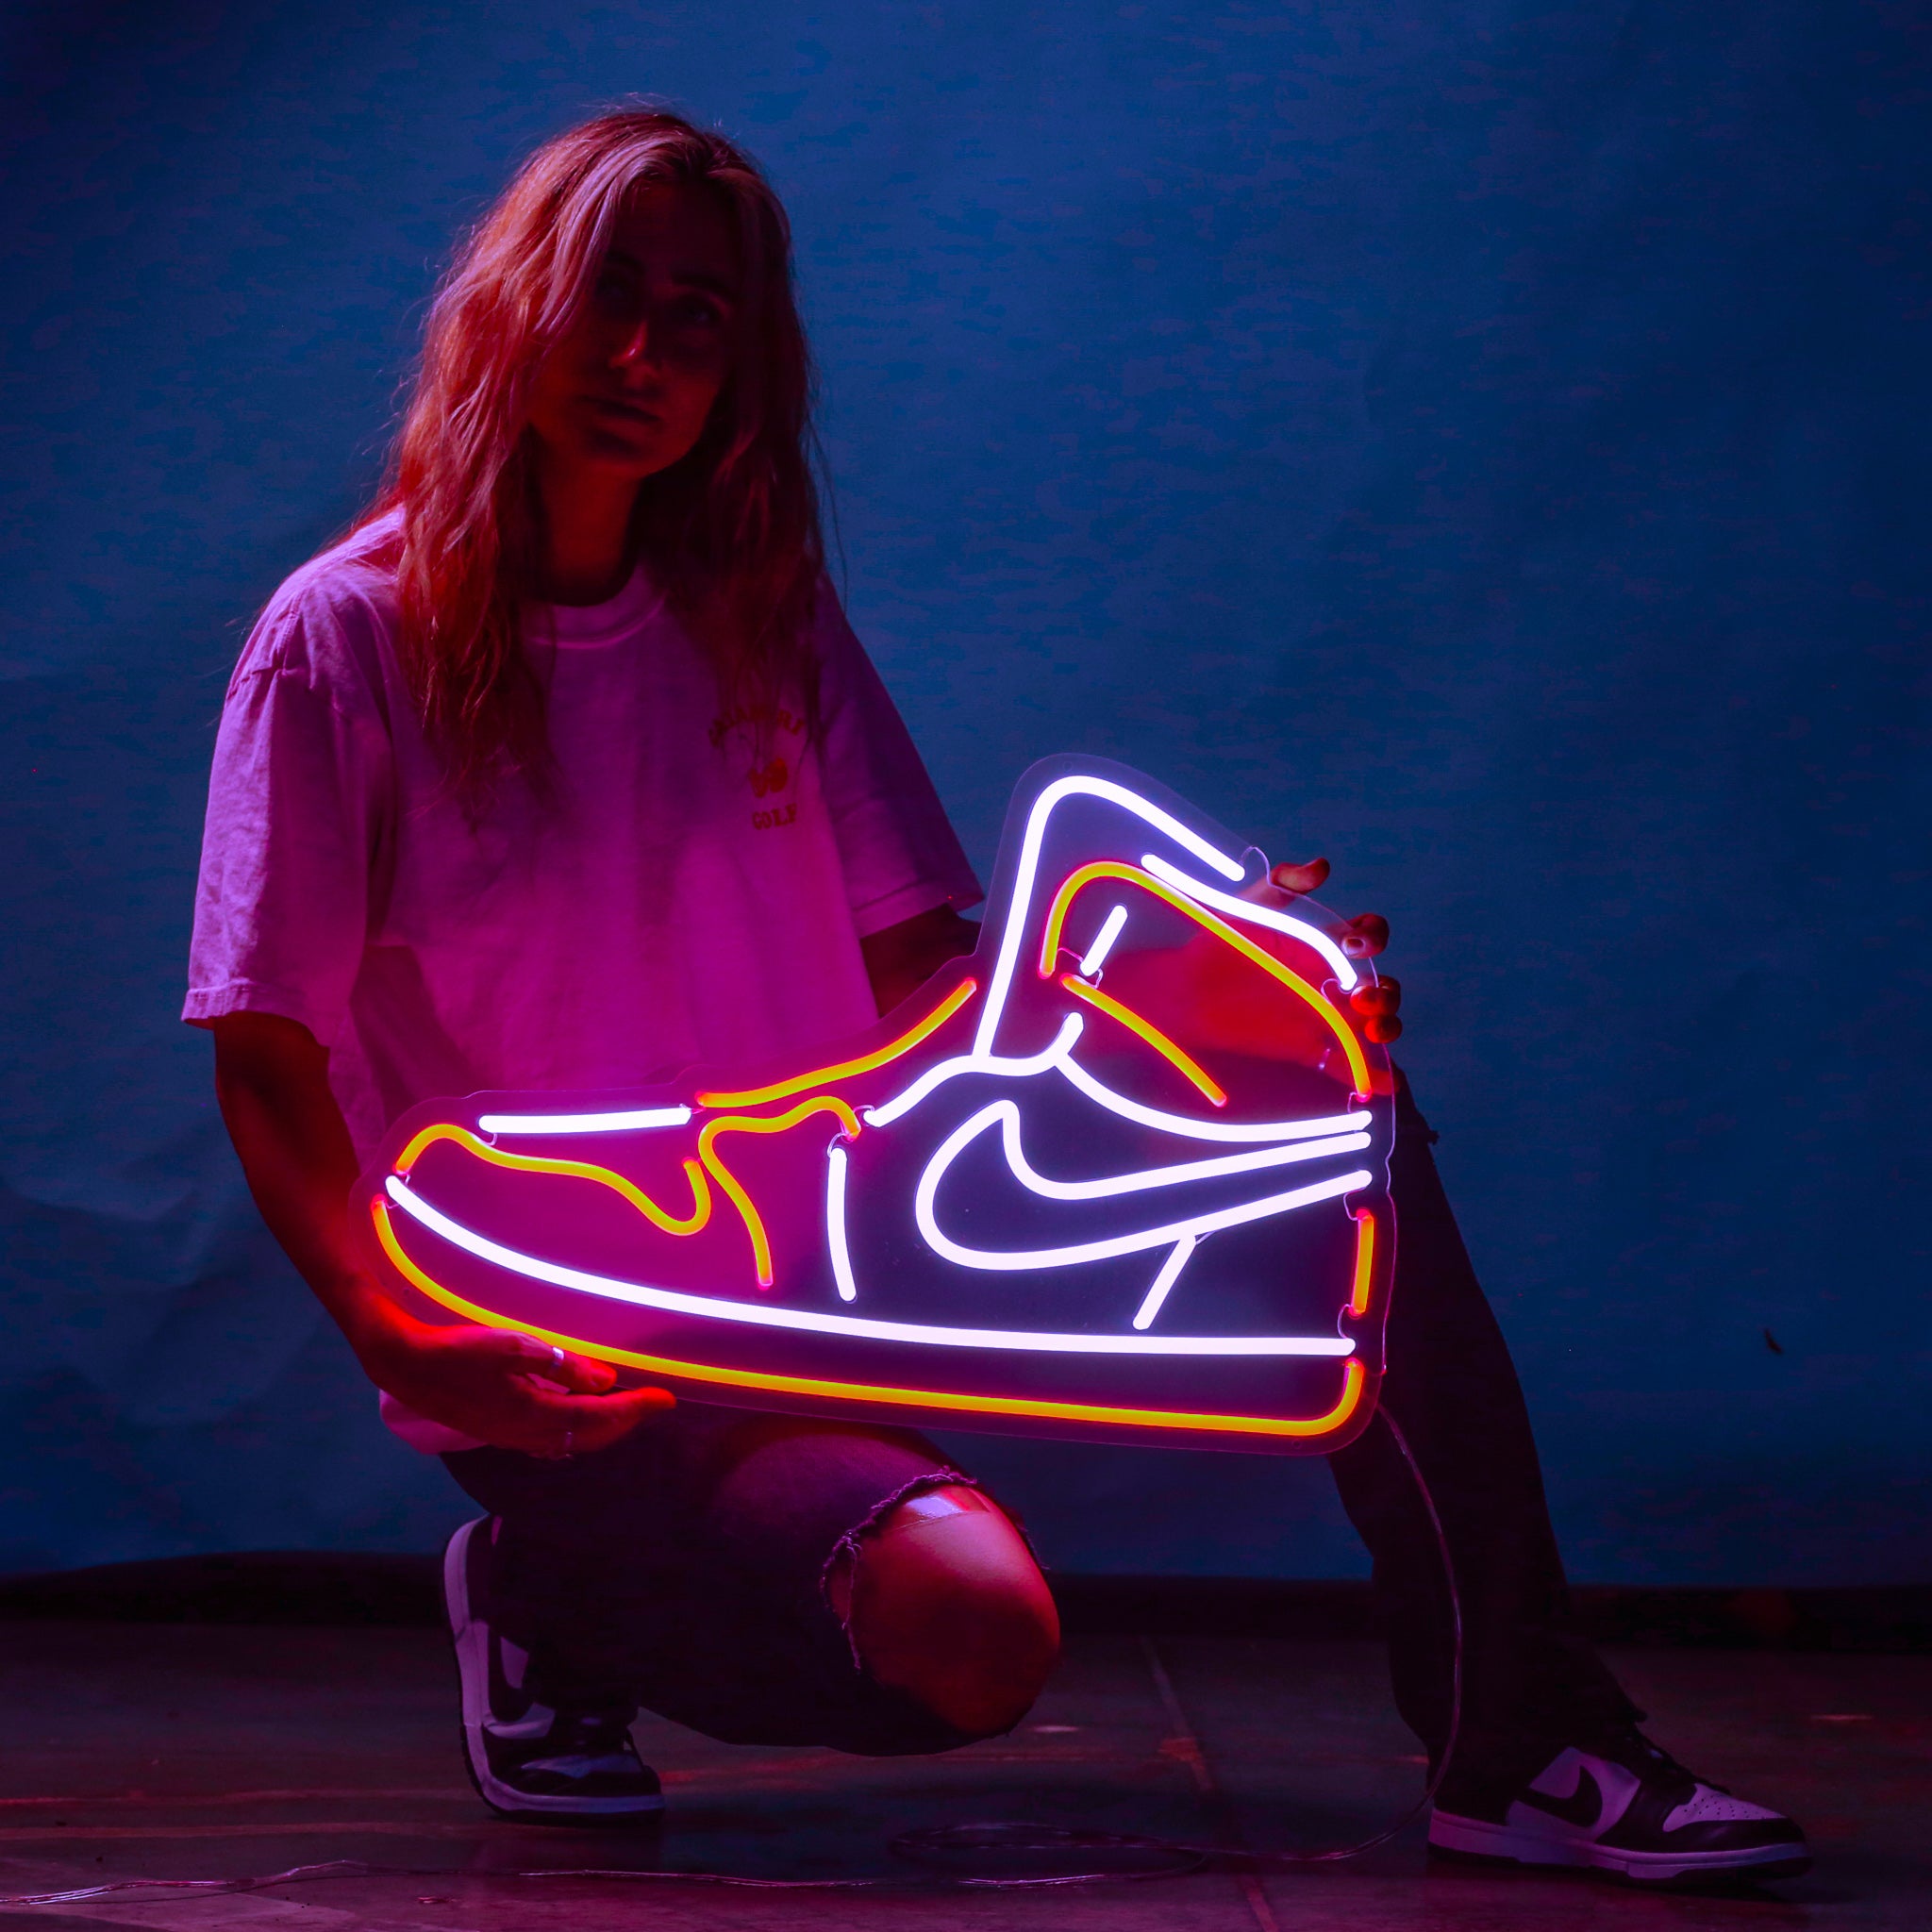 Amazon.com : Sneaker Neon Sign - Sports Shoe LED Neon light for Home  Party,Beer Pub,Cafes,Bedroom,Birthday Party Wall Decor Gift : Tools & Home  Improvement